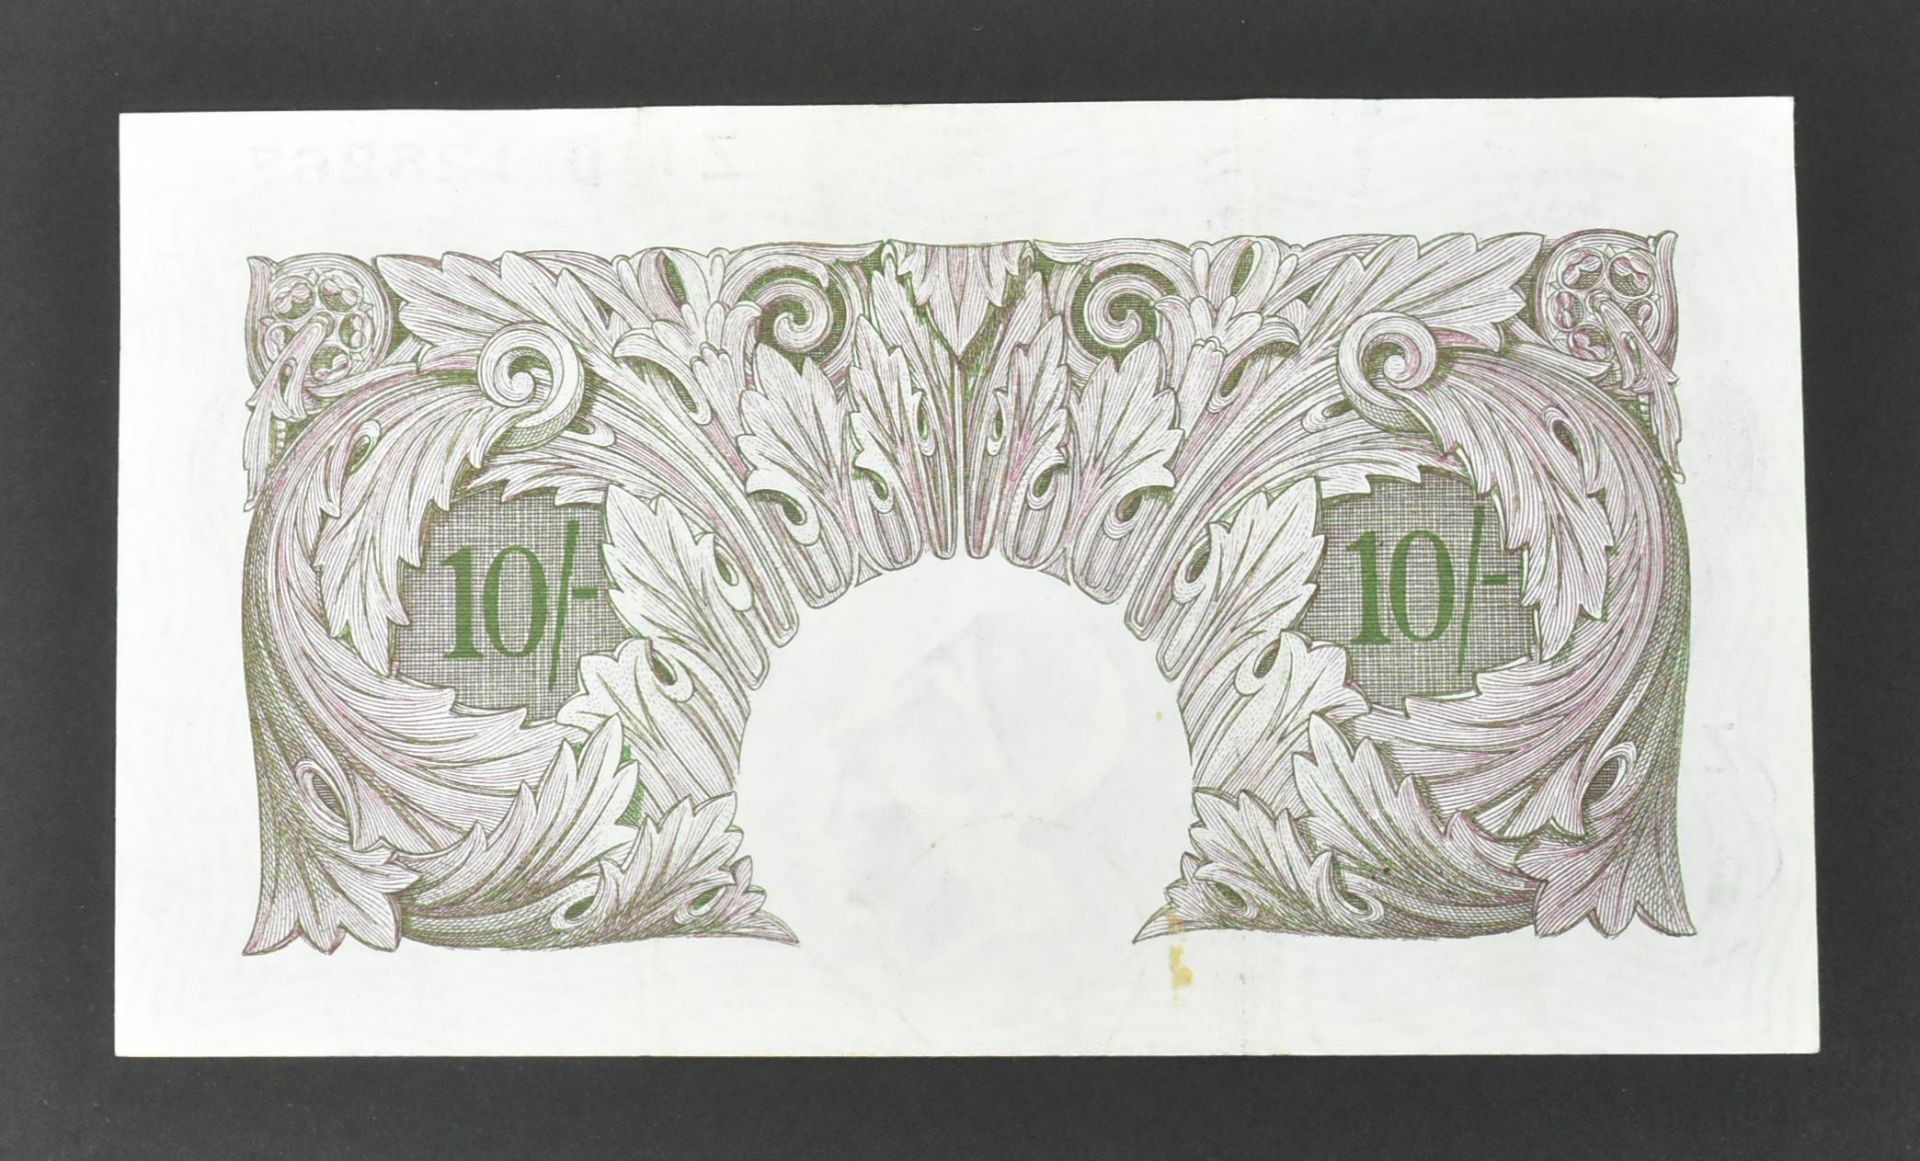 COLLECTION BRITISH UNCIRCULATED BANK NOTES - Image 12 of 61